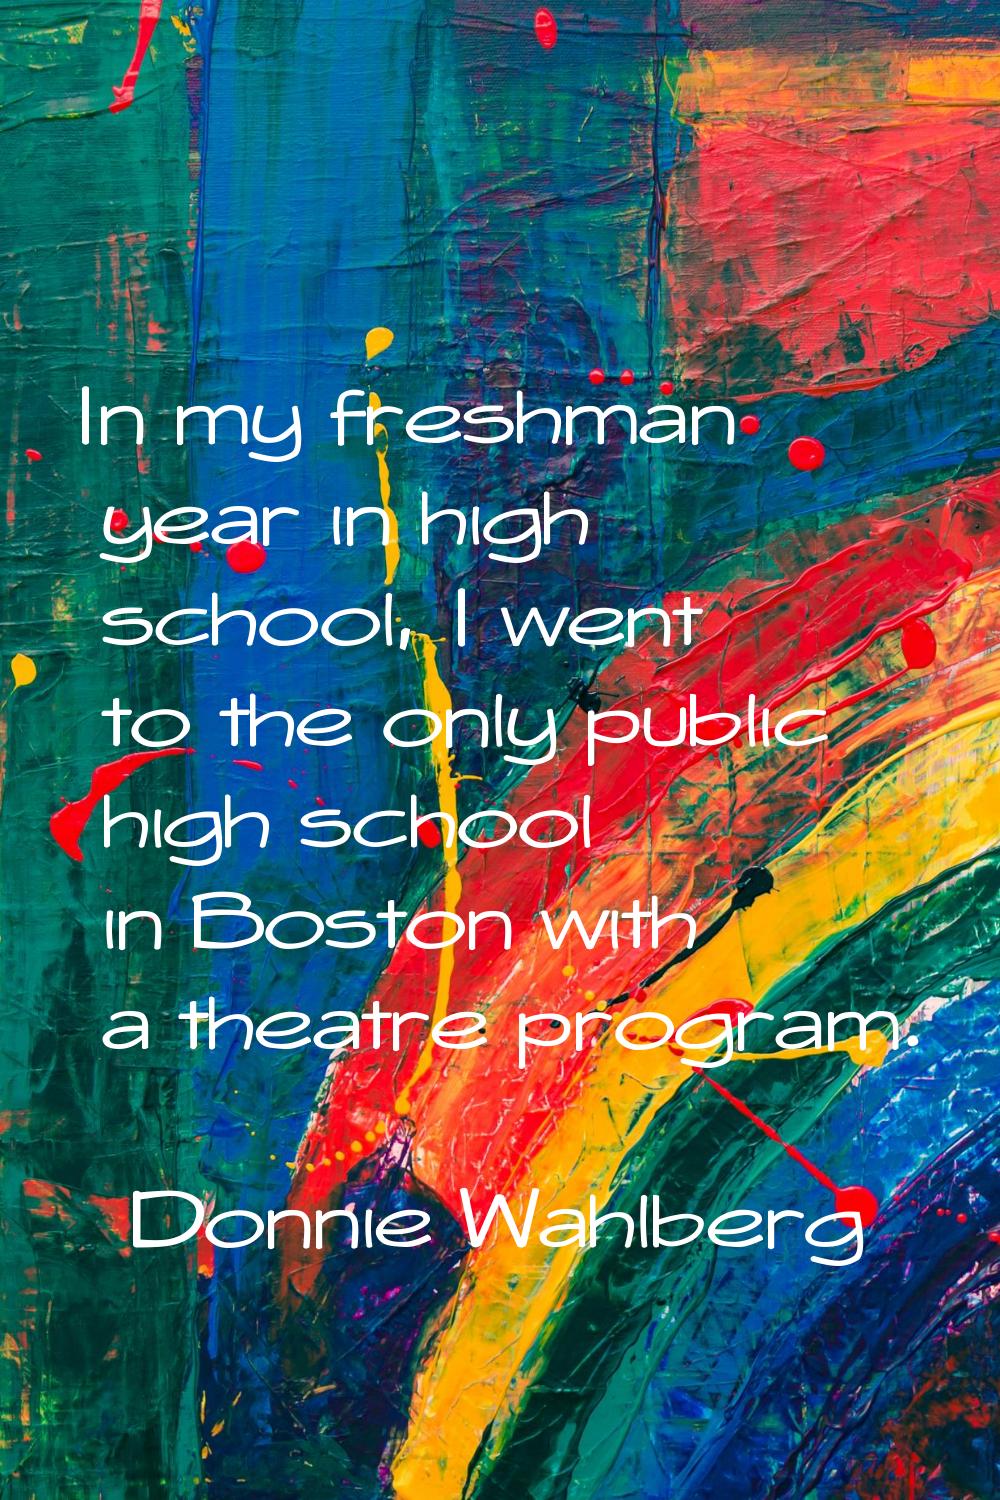 In my freshman year in high school, I went to the only public high school in Boston with a theatre 